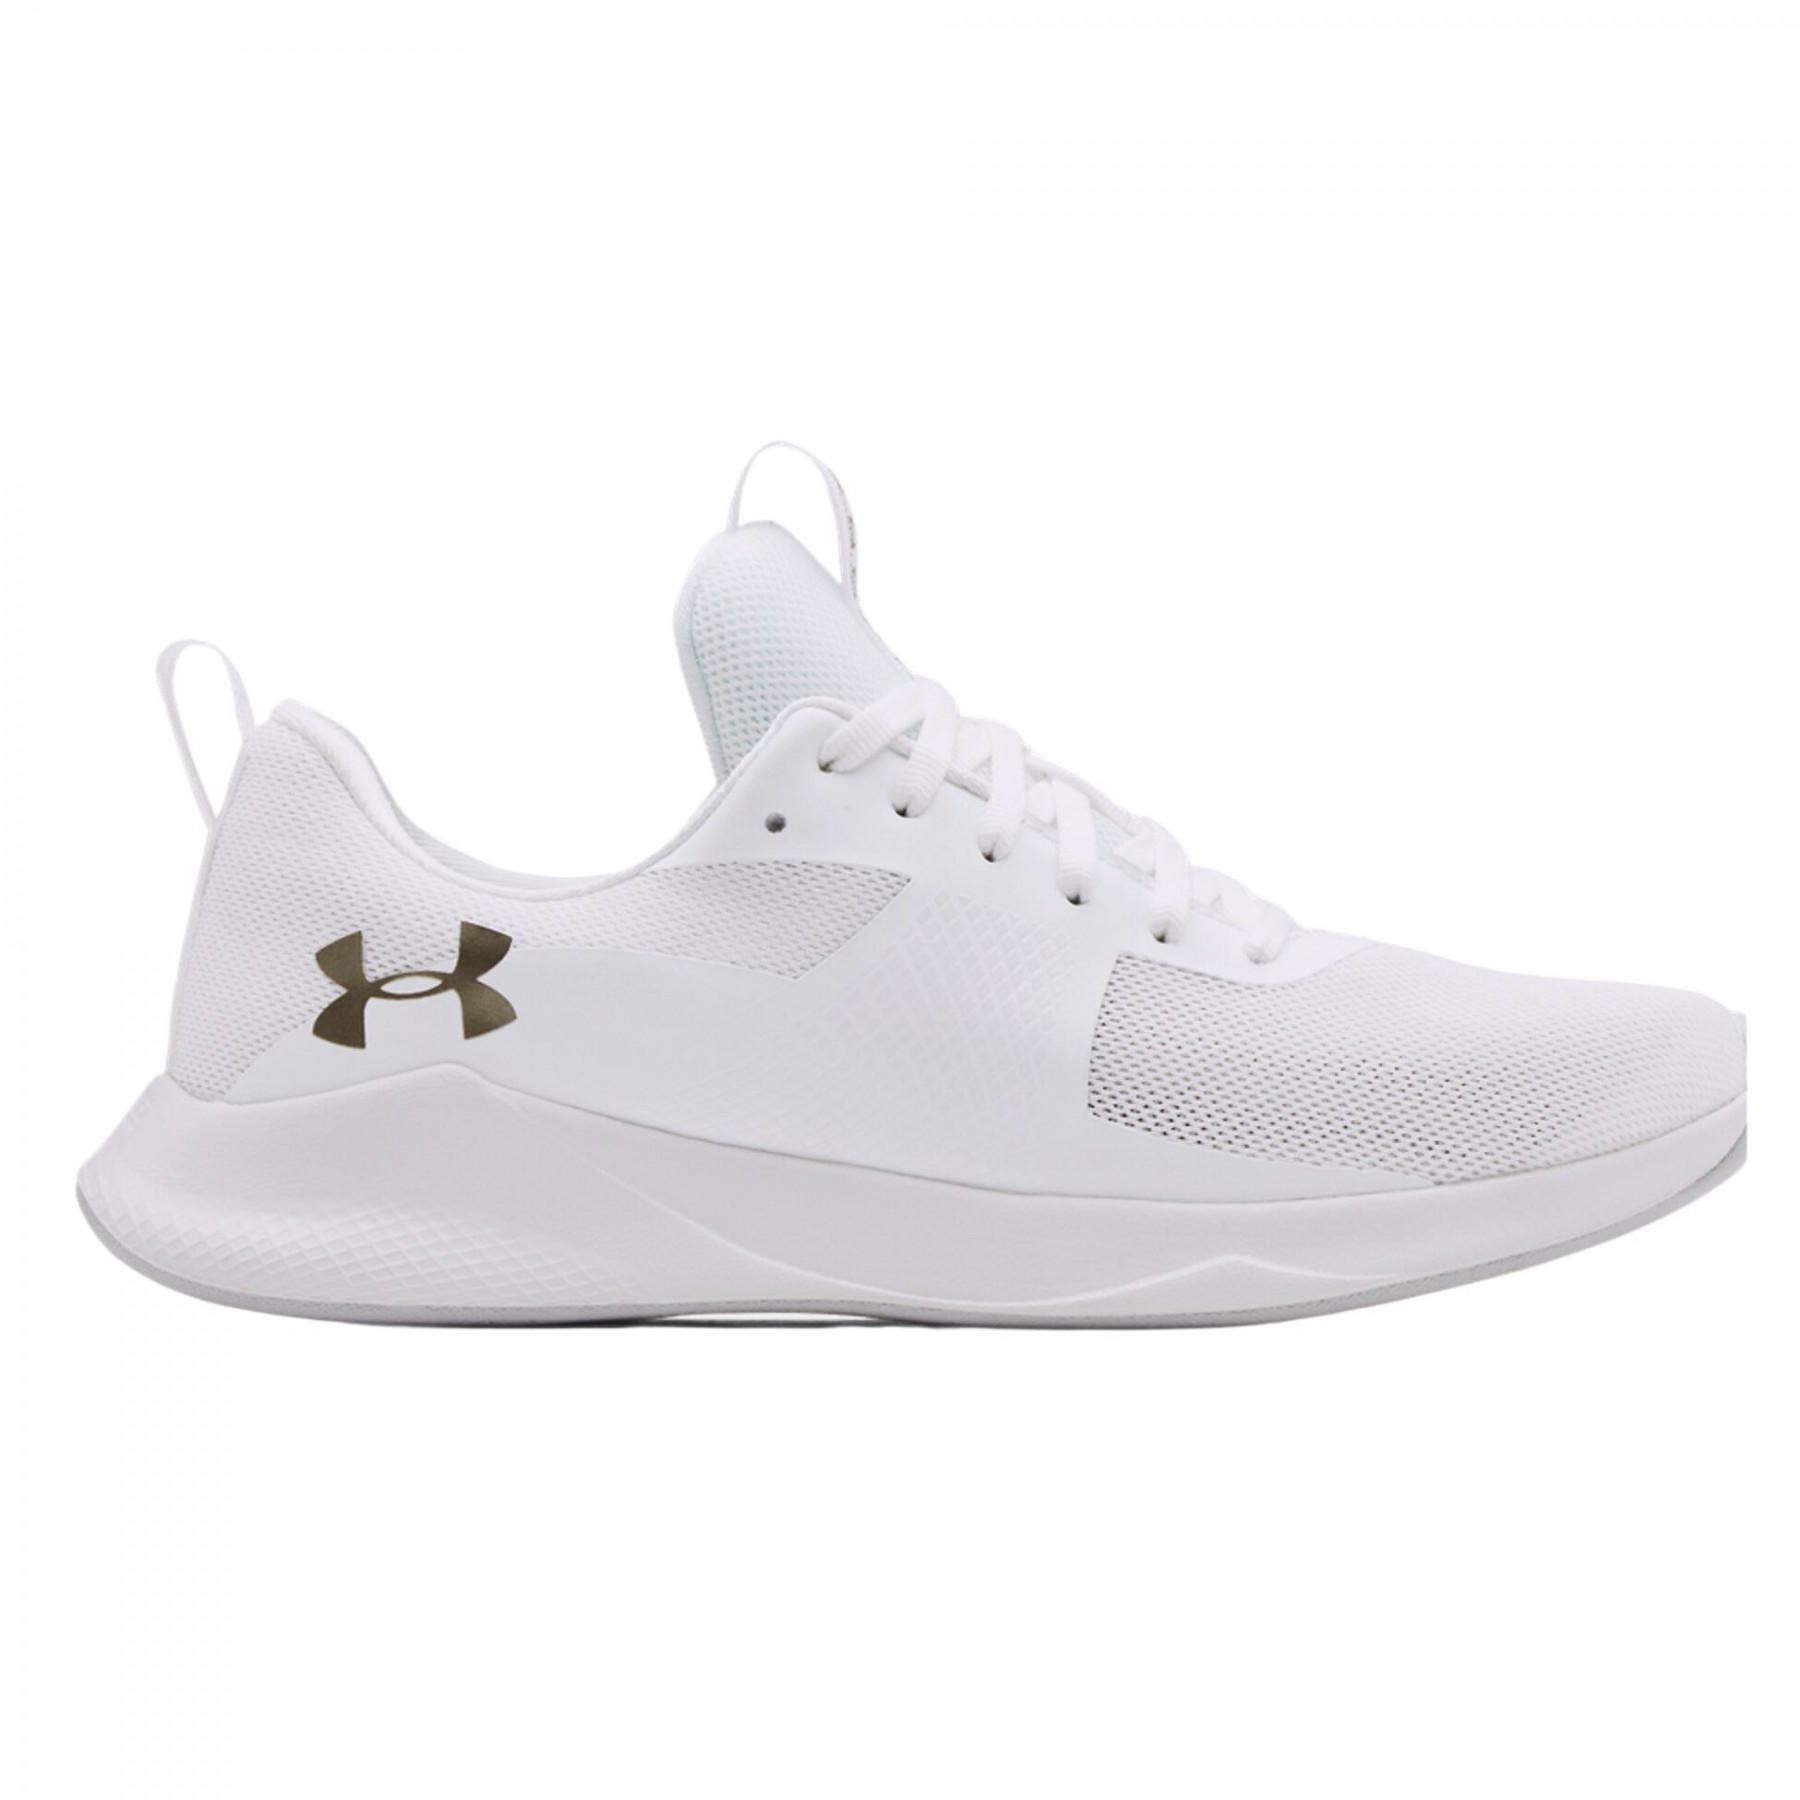 Chaussures femme Under Armour Charged Aurora